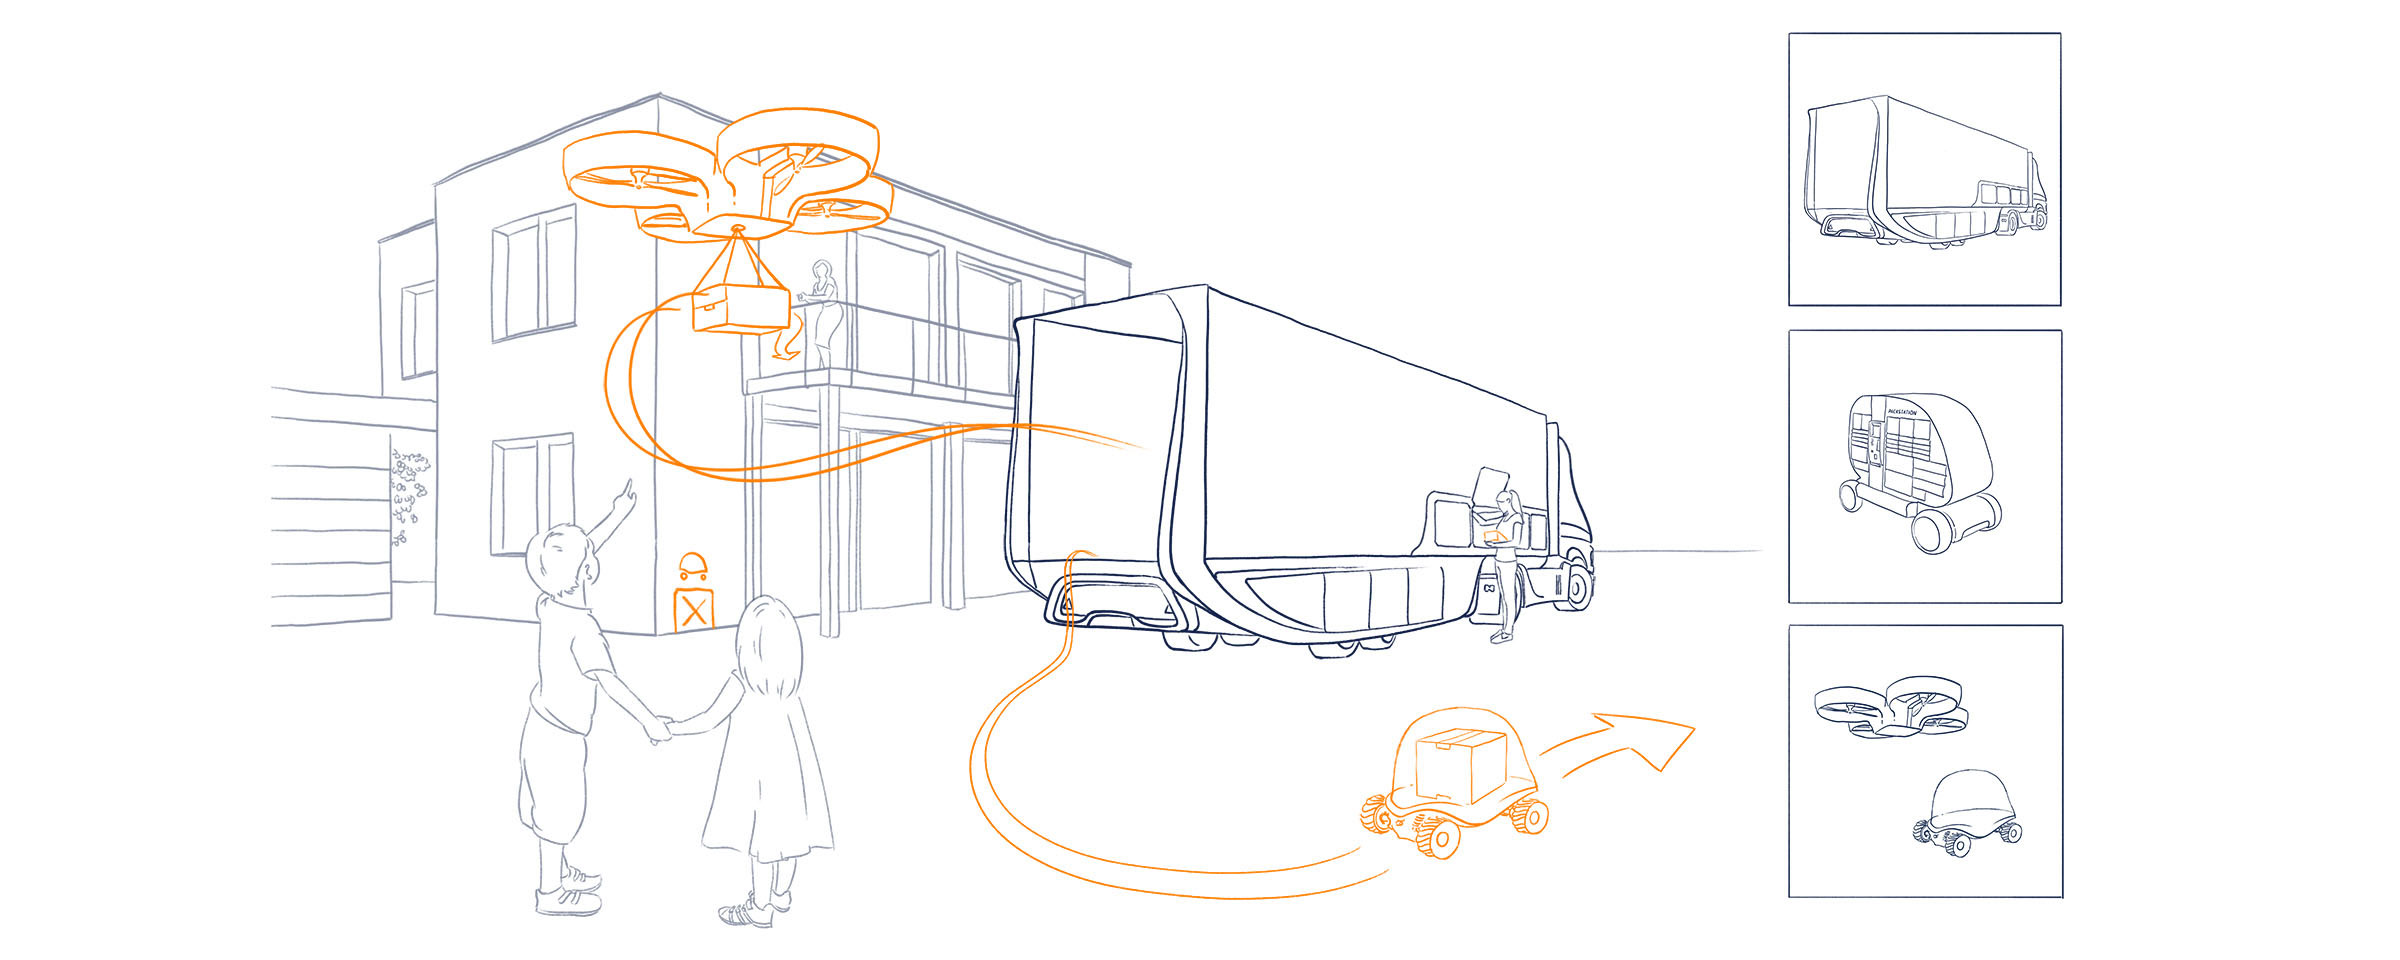 Drawing of possible usage of autonomous transport devices in daily situations